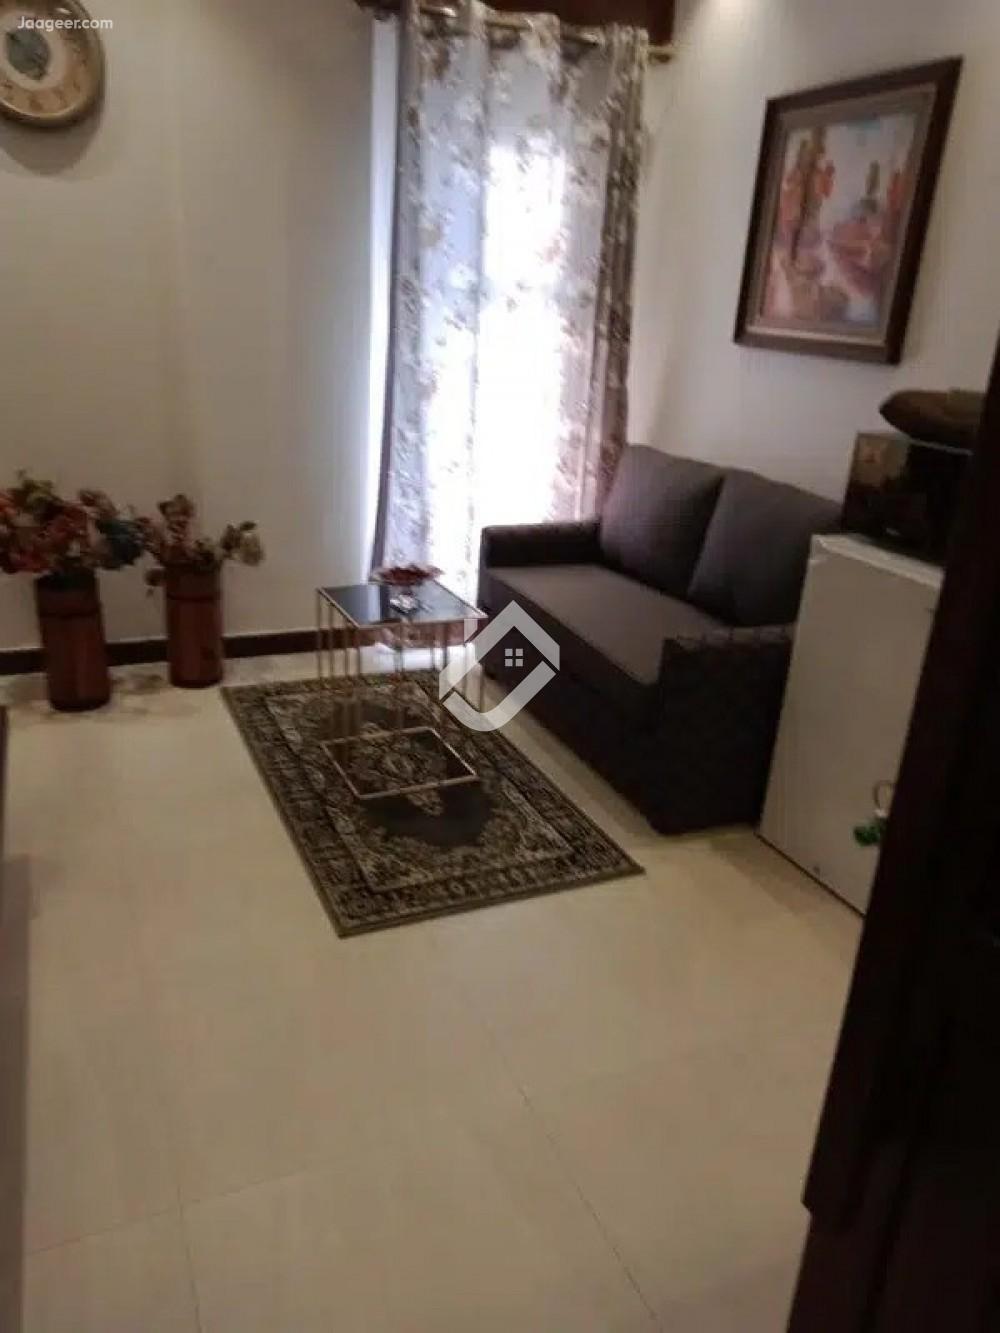 View  1 Bed Furnished Apartment For Rent In Bahria Town  in Bahria Town, Lahore